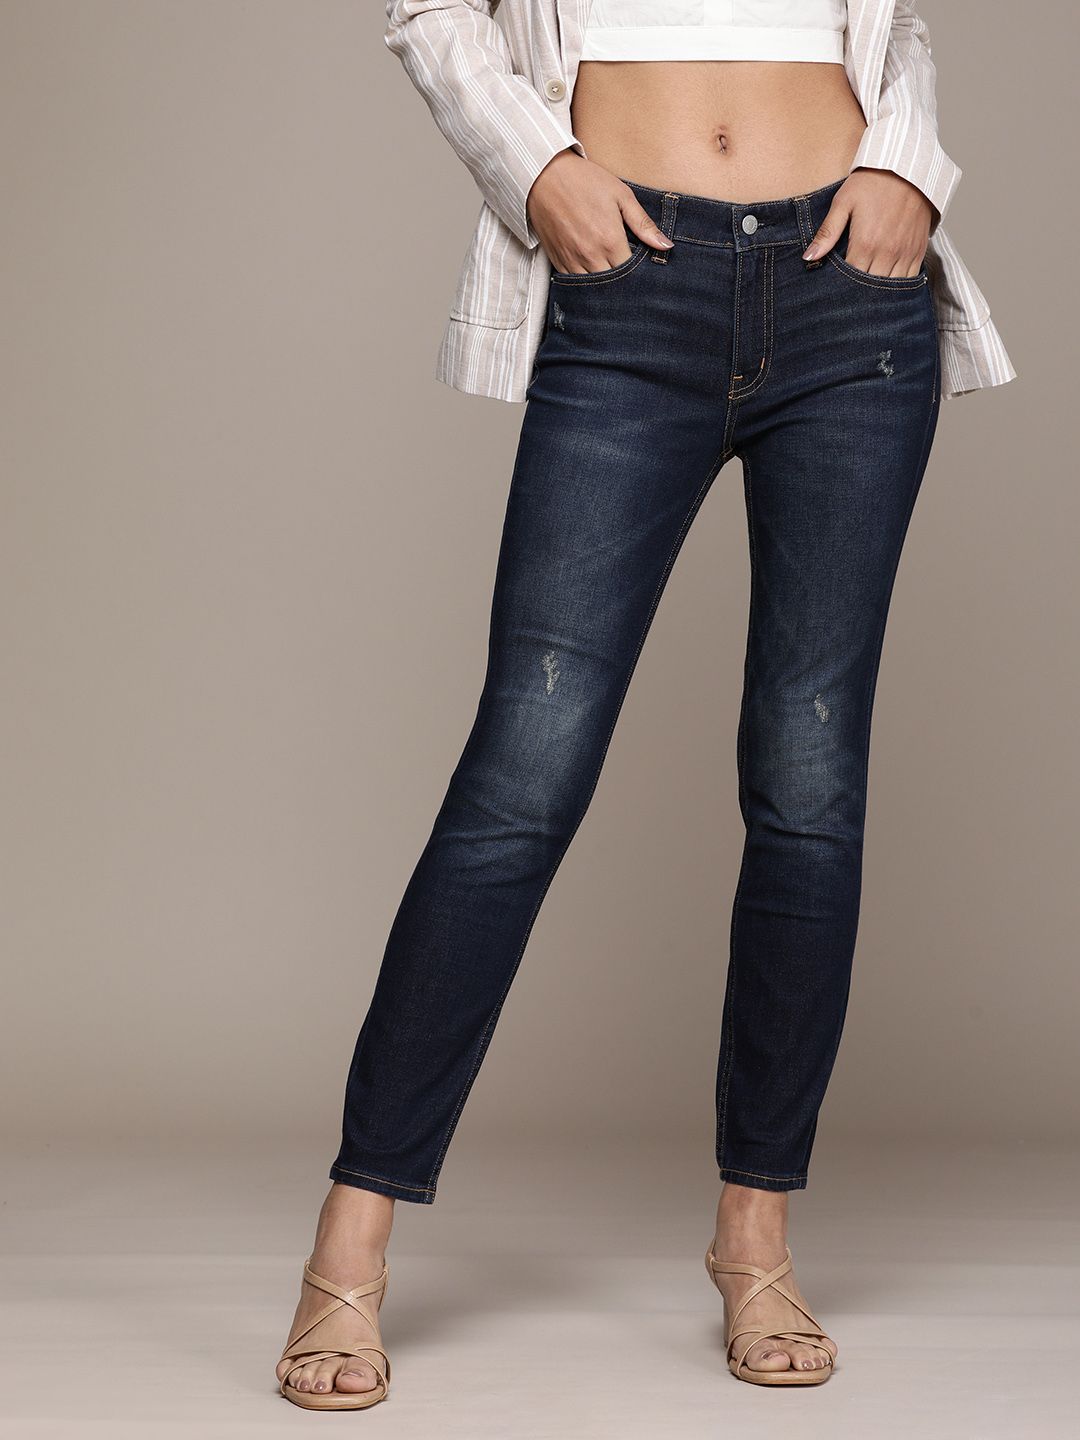 Calvin Klein Jeans Women Blue Skinny Fit Light Fade Stretchable Casual Jeans Price in India